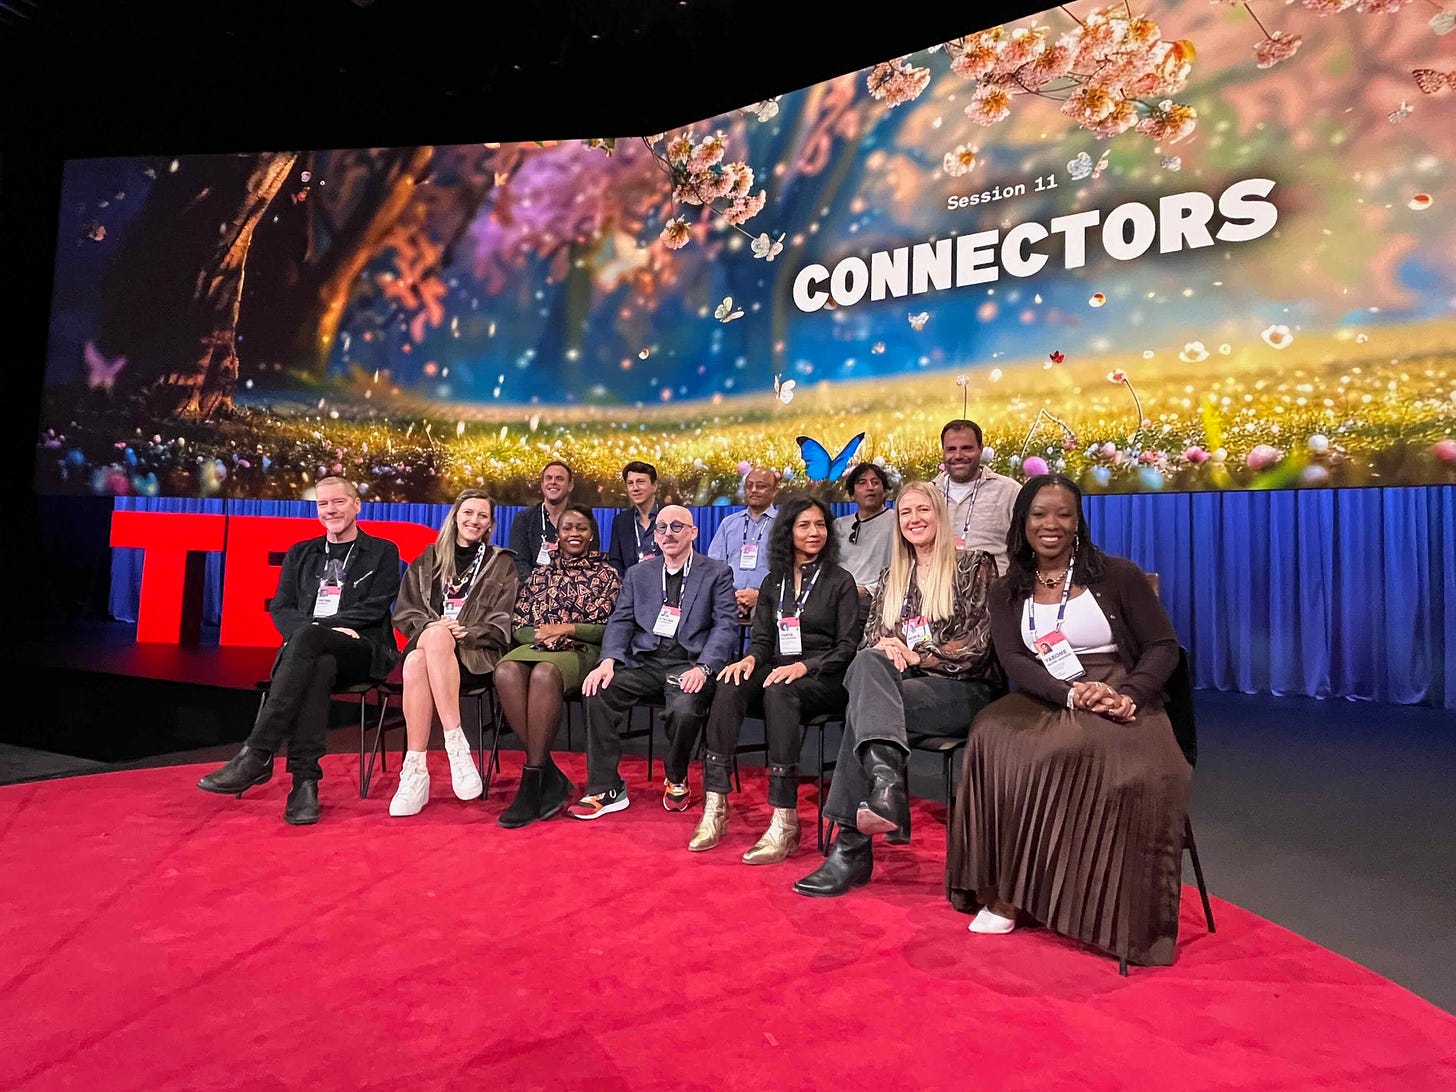 A photograph of the author and 11 other people seated on the TED stage smiling at the camera in front of a screen that reads 'Session 11: Connectors'